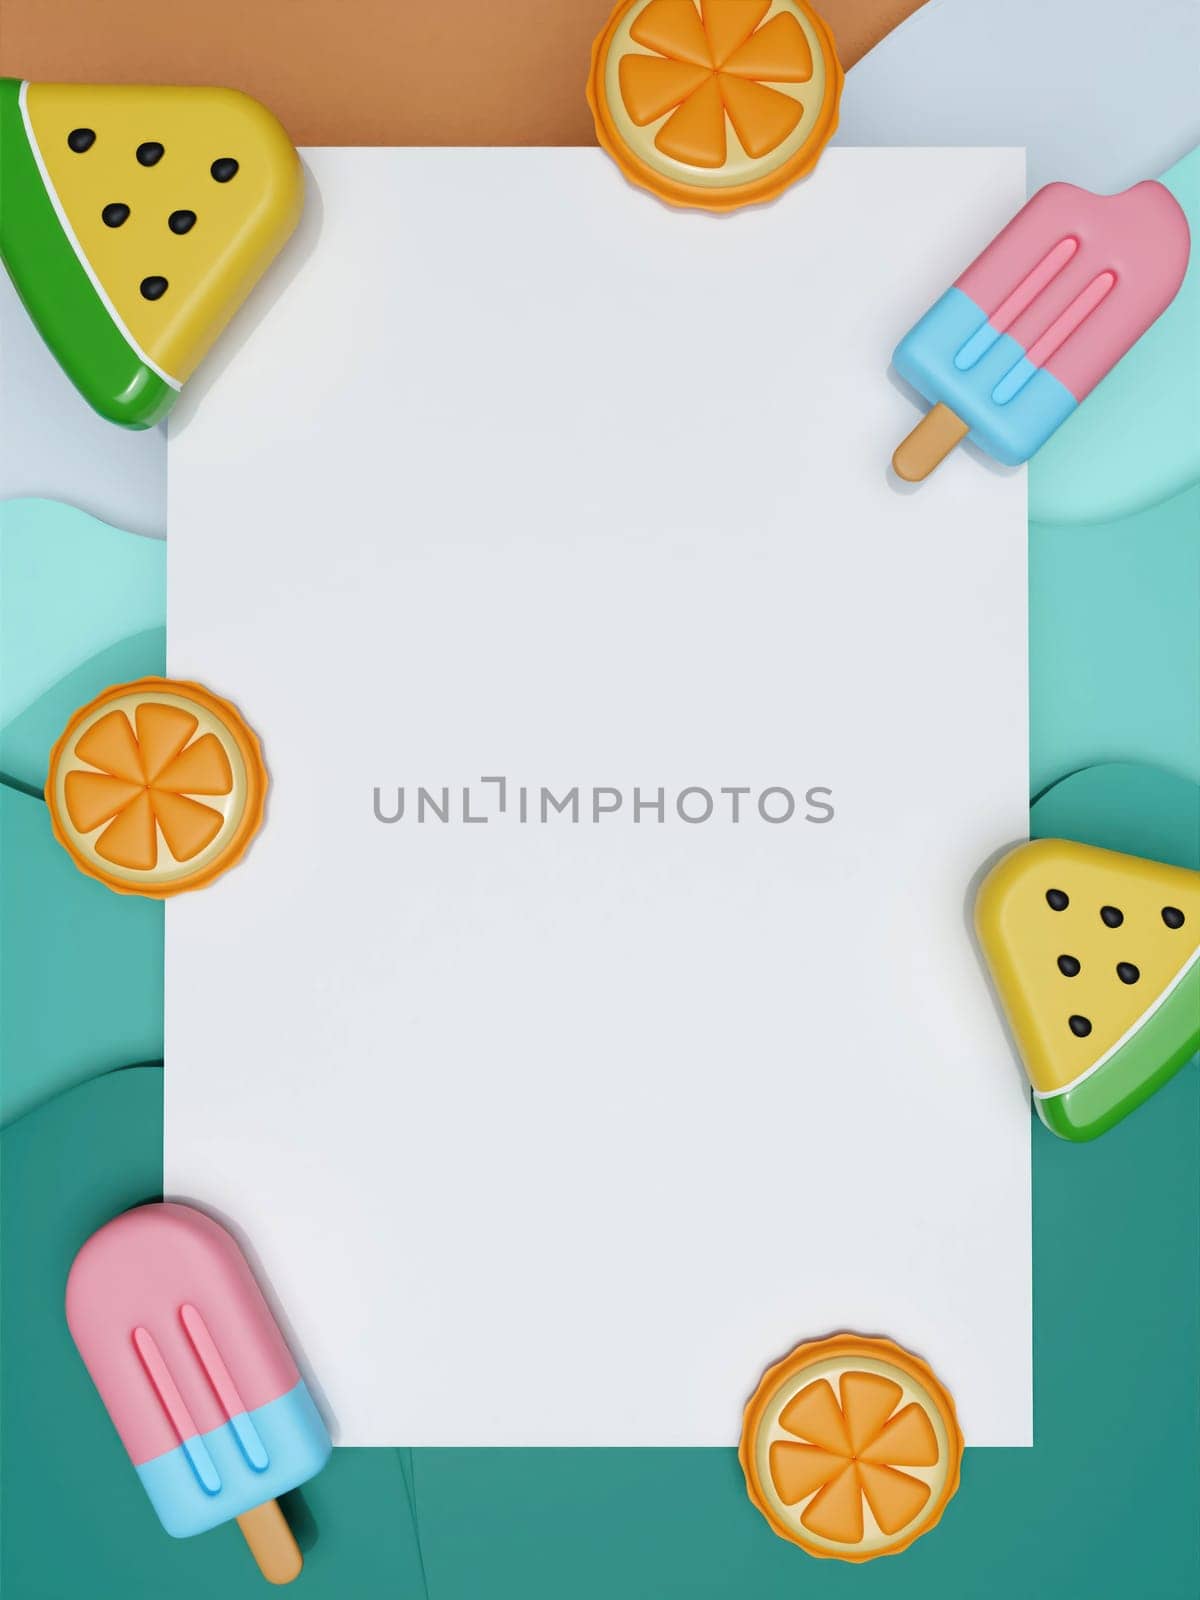 Summer vacation. white frame Decorated with popsicle watermelon and orange. Creative travel concept idea with copy space. illustration banner 3d rendering illustration.